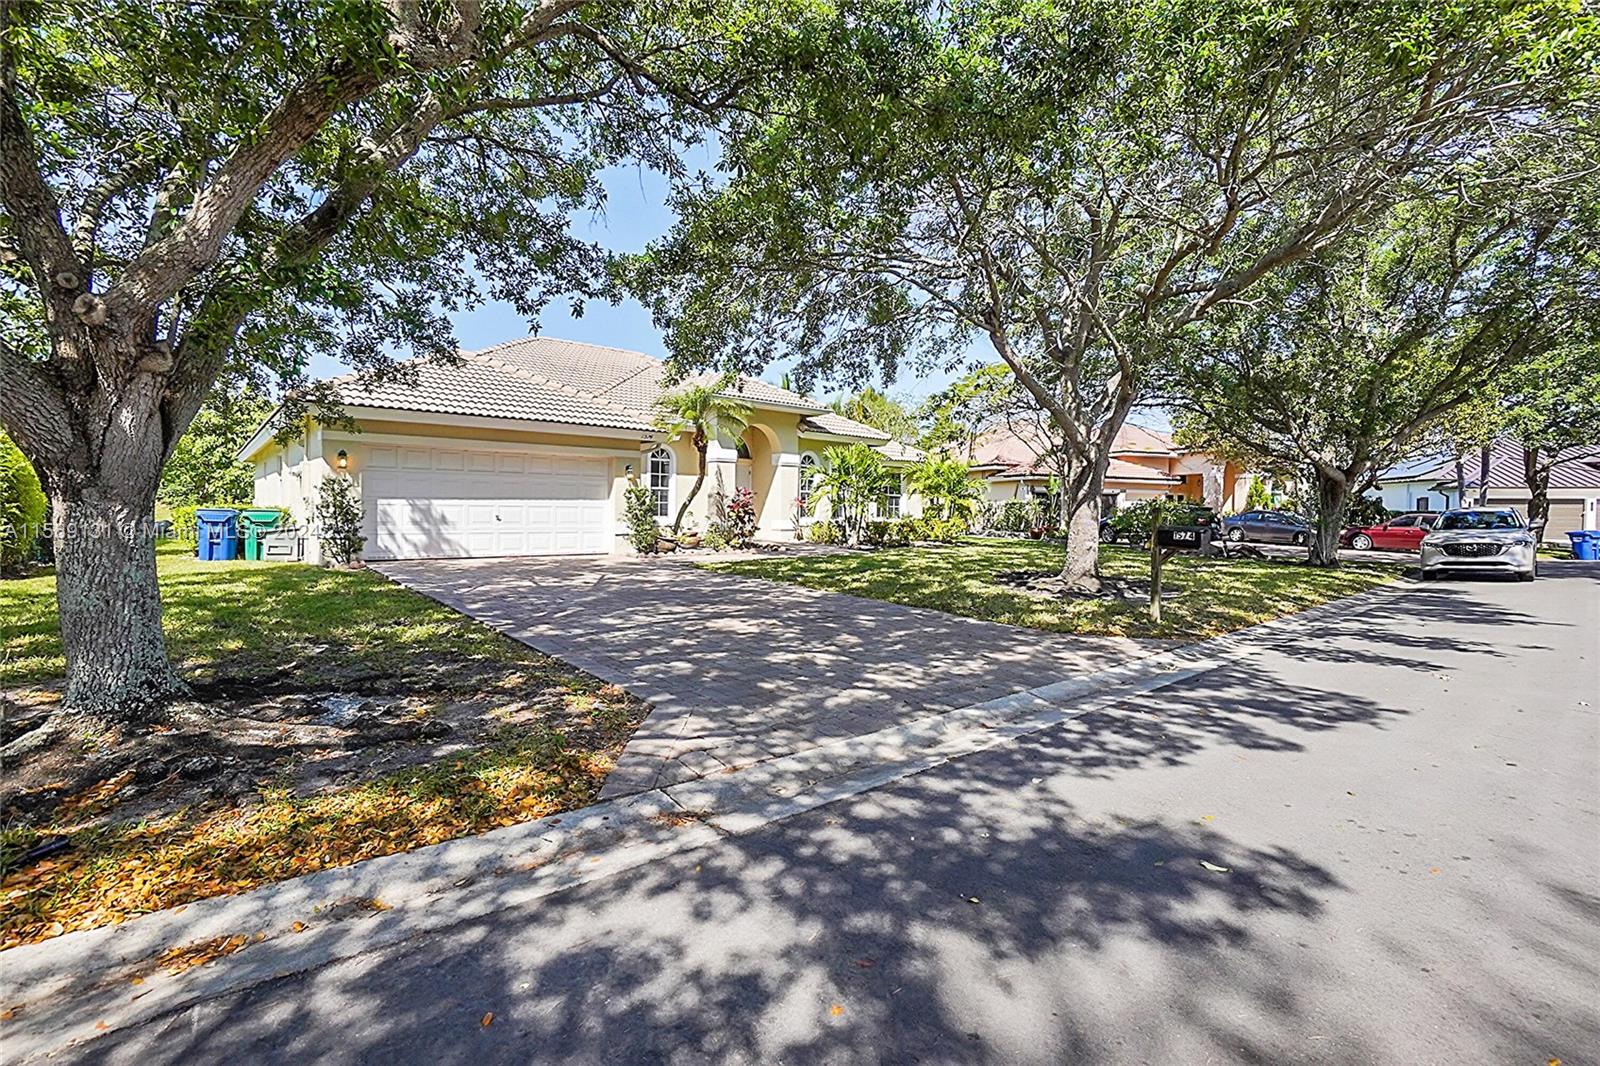 1574 NW 103 Ter, Coral Springs, Florida 33071, 4 Bedrooms Bedrooms, ,3 BathroomsBathrooms,Residential,For Sale,1574 NW 103 Ter,A11569131